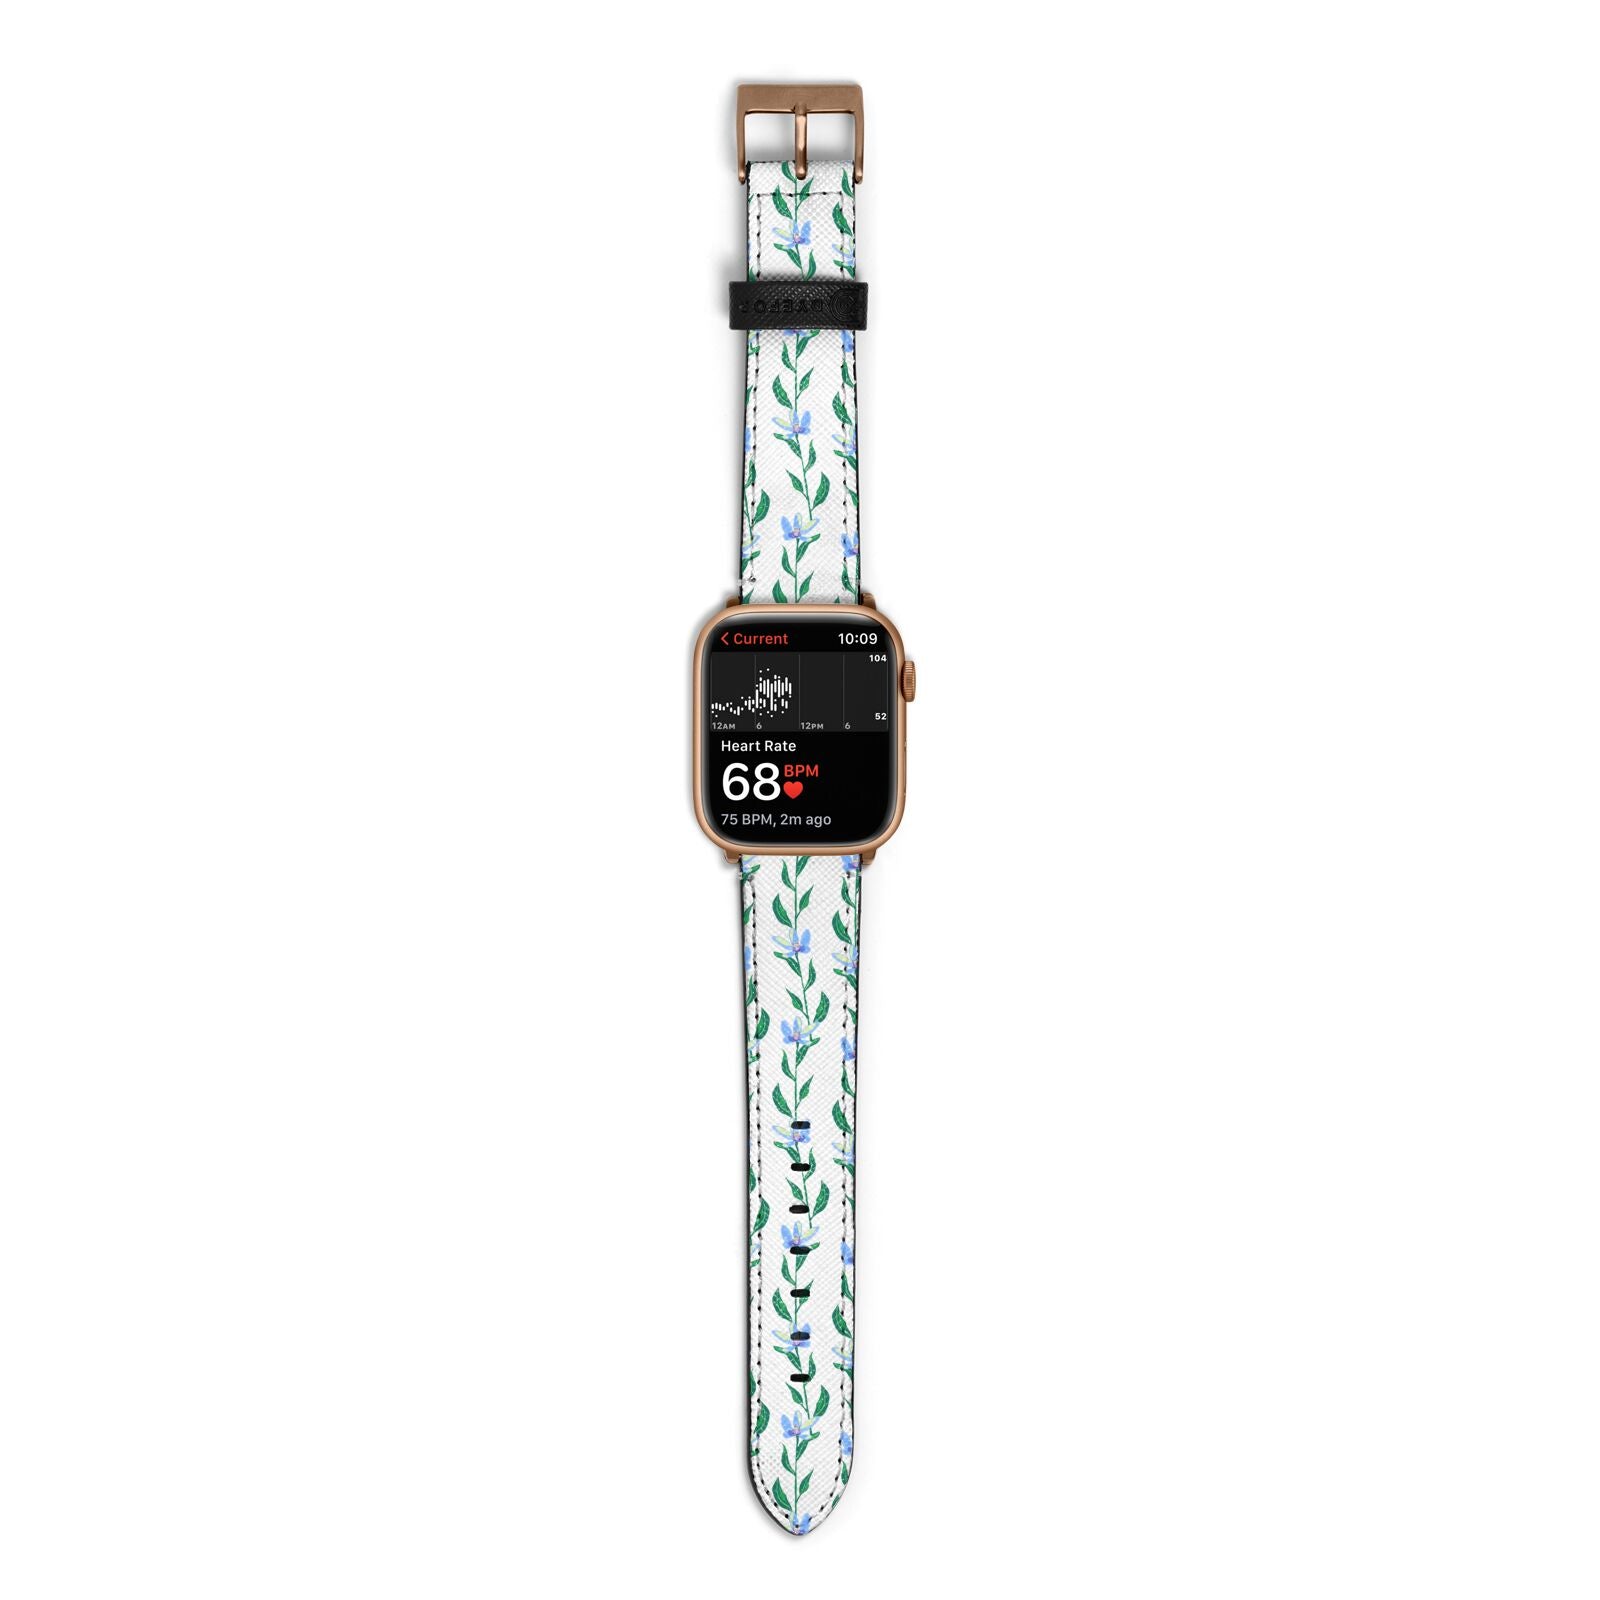 Flower Chain Apple Watch Strap Size 38mm with Gold Hardware